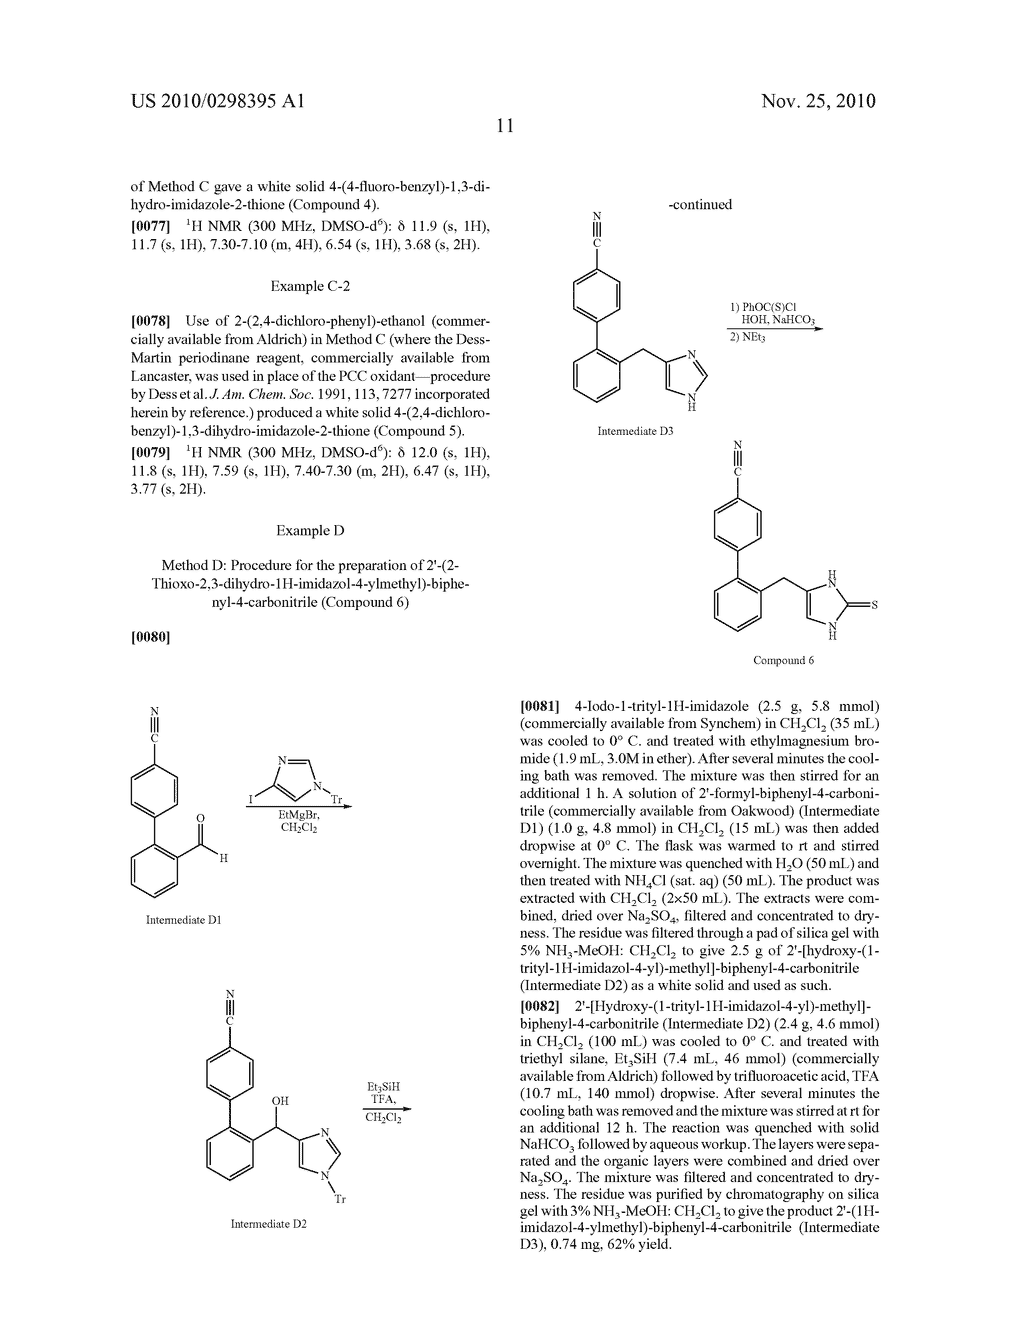 UNSUBSTITUTED AND SUBSTITUTED 4-BENZYL-1,3-DIHYDRO-IMIDAZOLE-2-THIONES ACTING AS SPECIFIC OR SELECTIVE ALPHA2 ADRENERGIC AGONISTS AND METHODS FOR USING THE SAME - diagram, schematic, and image 12